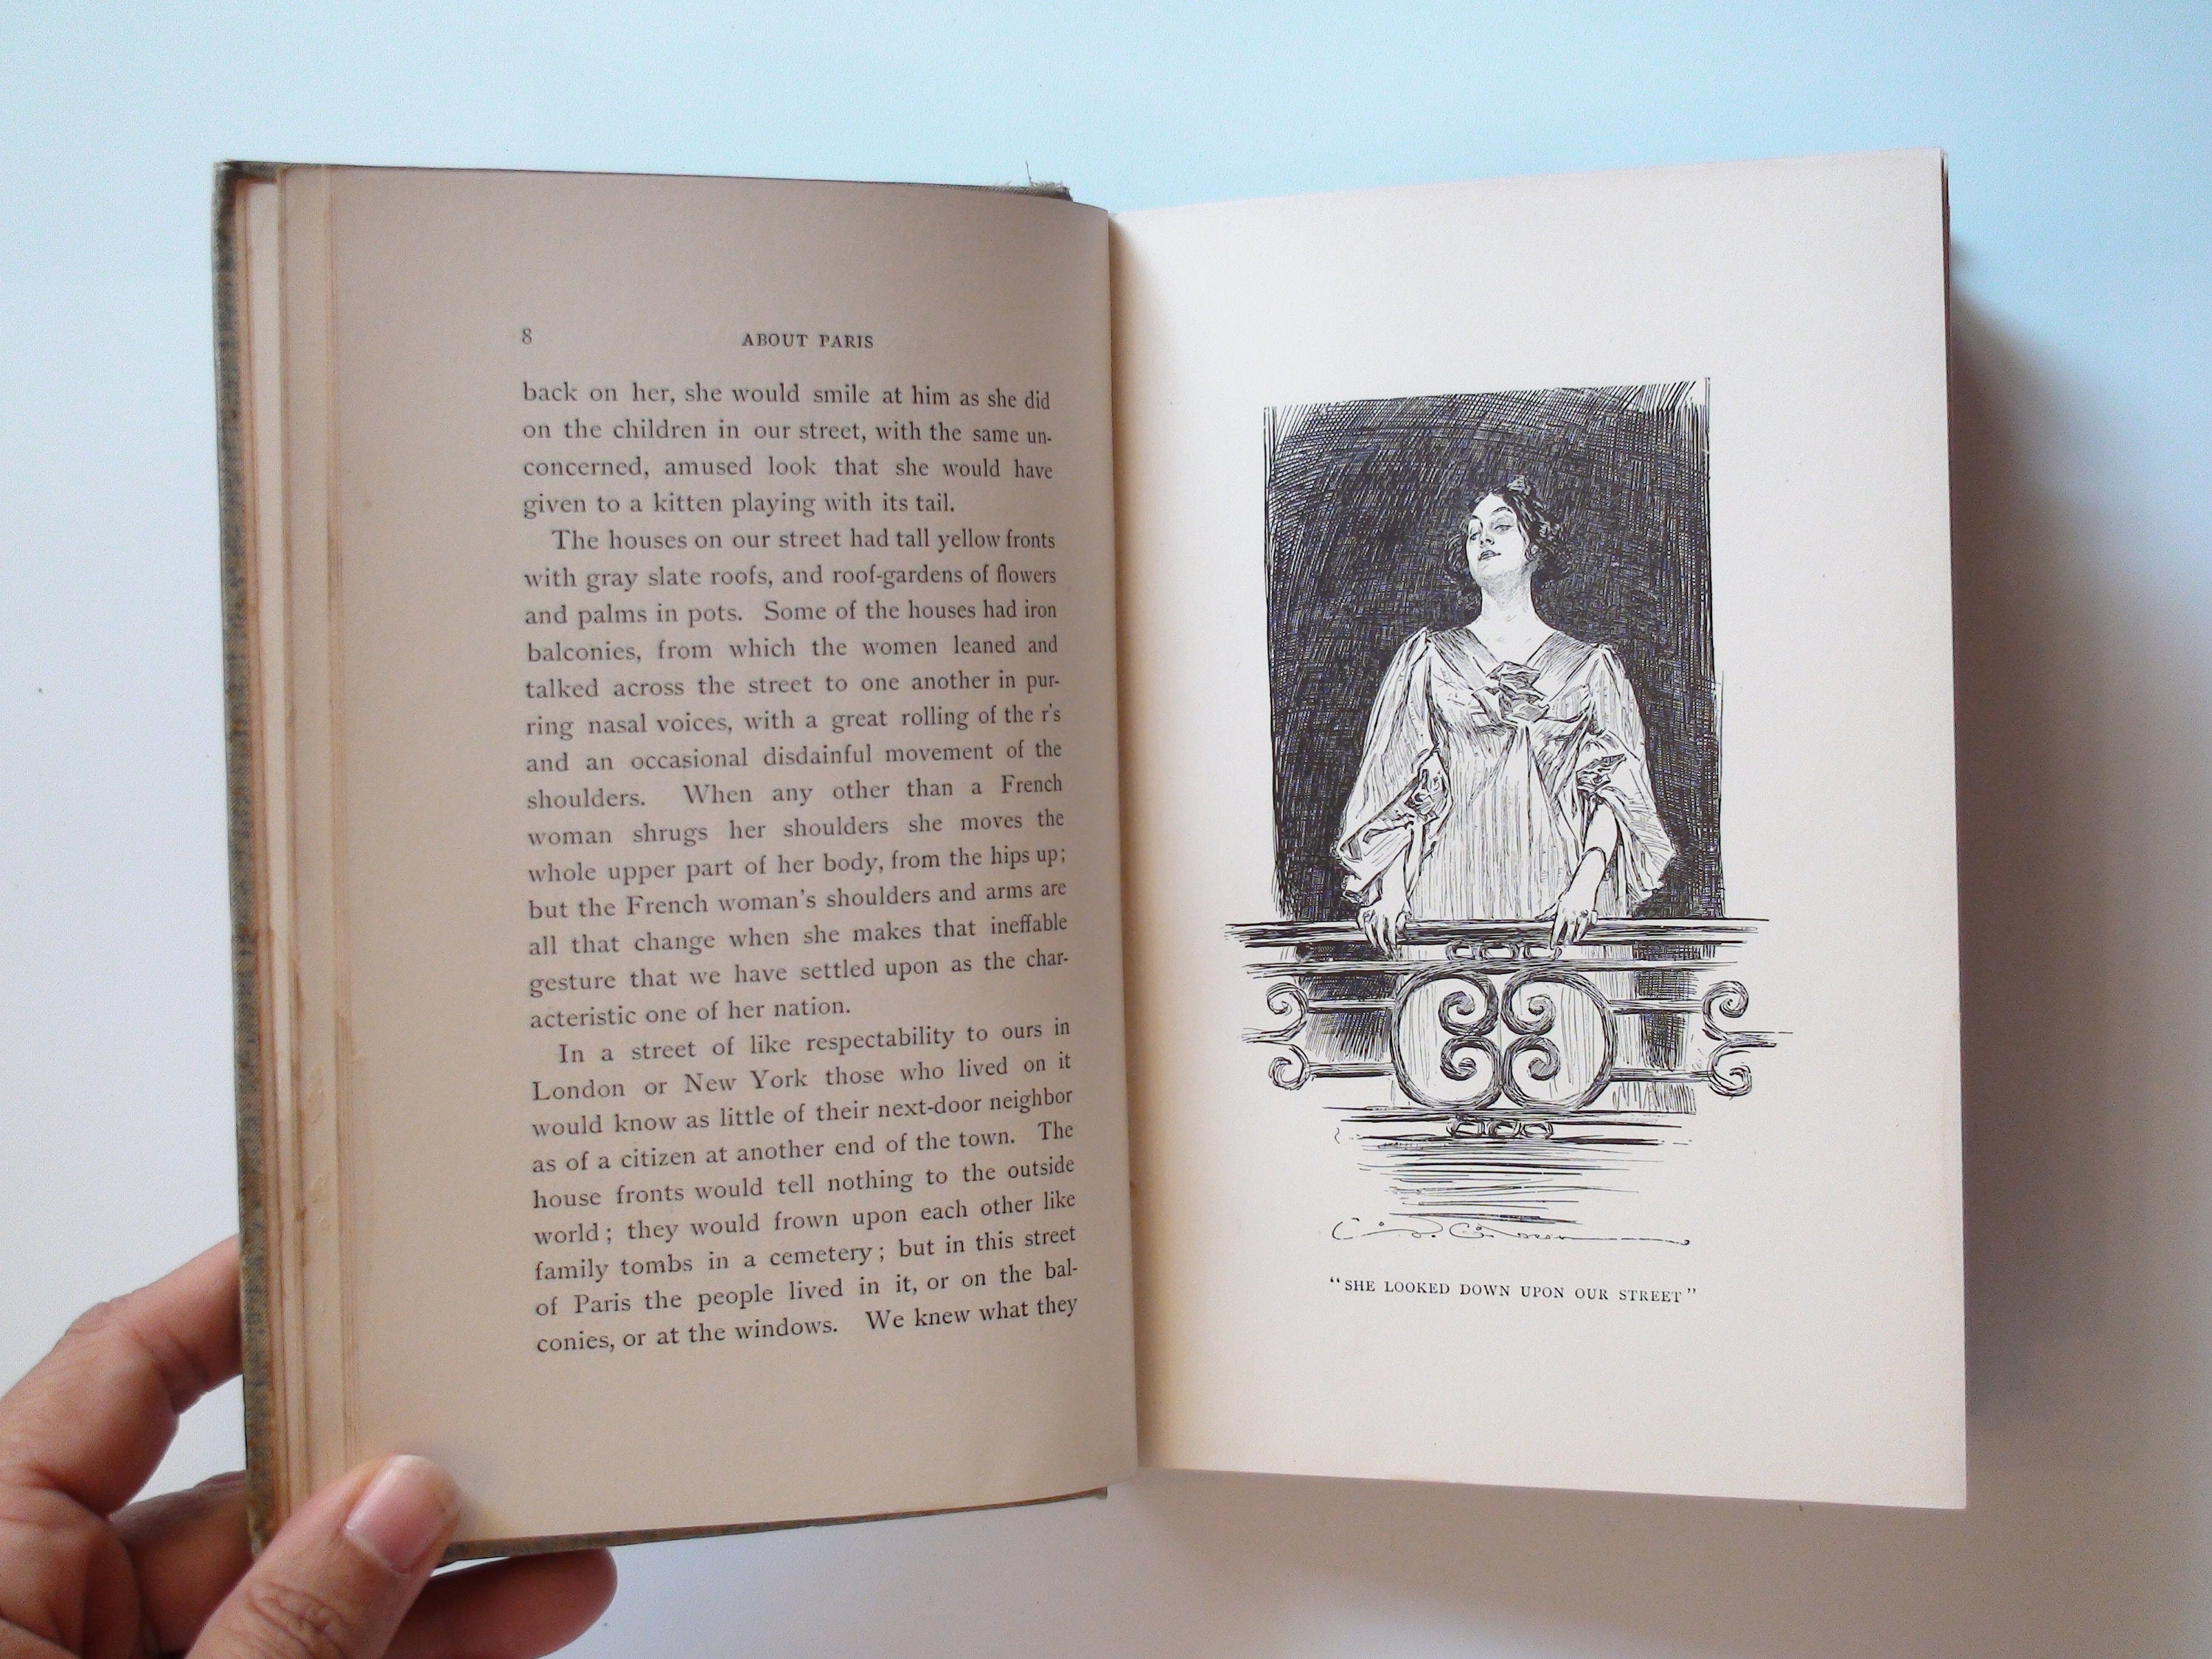 About Paris by Richard Harding Davis, Illustrated by Dana Gibson, 1895